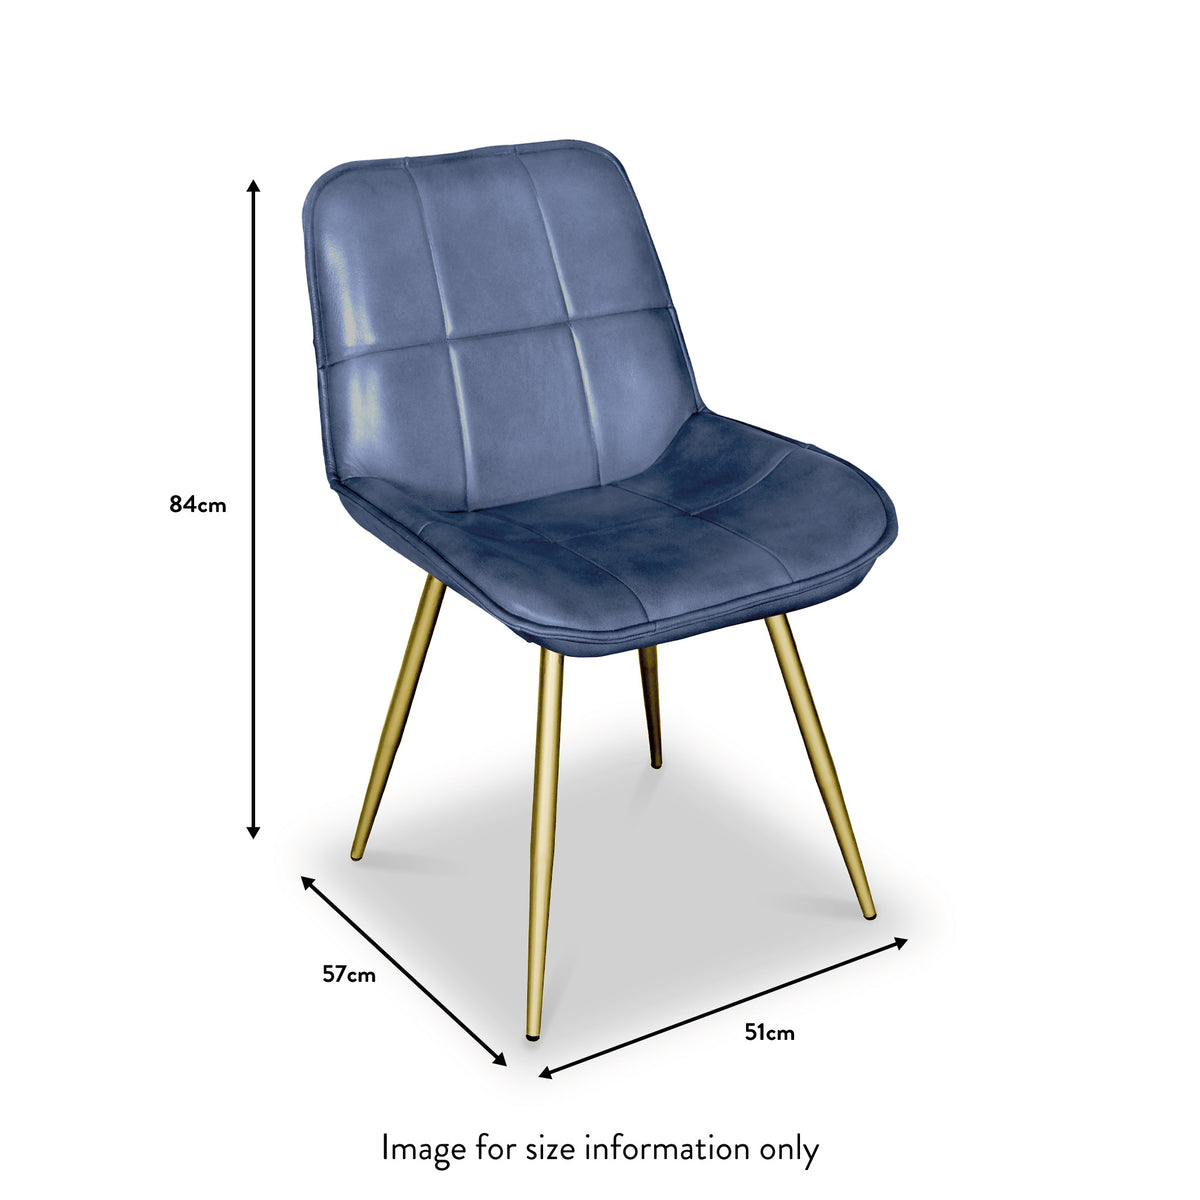 Danica Blue Buffalo Leather Dining Chair dimensions